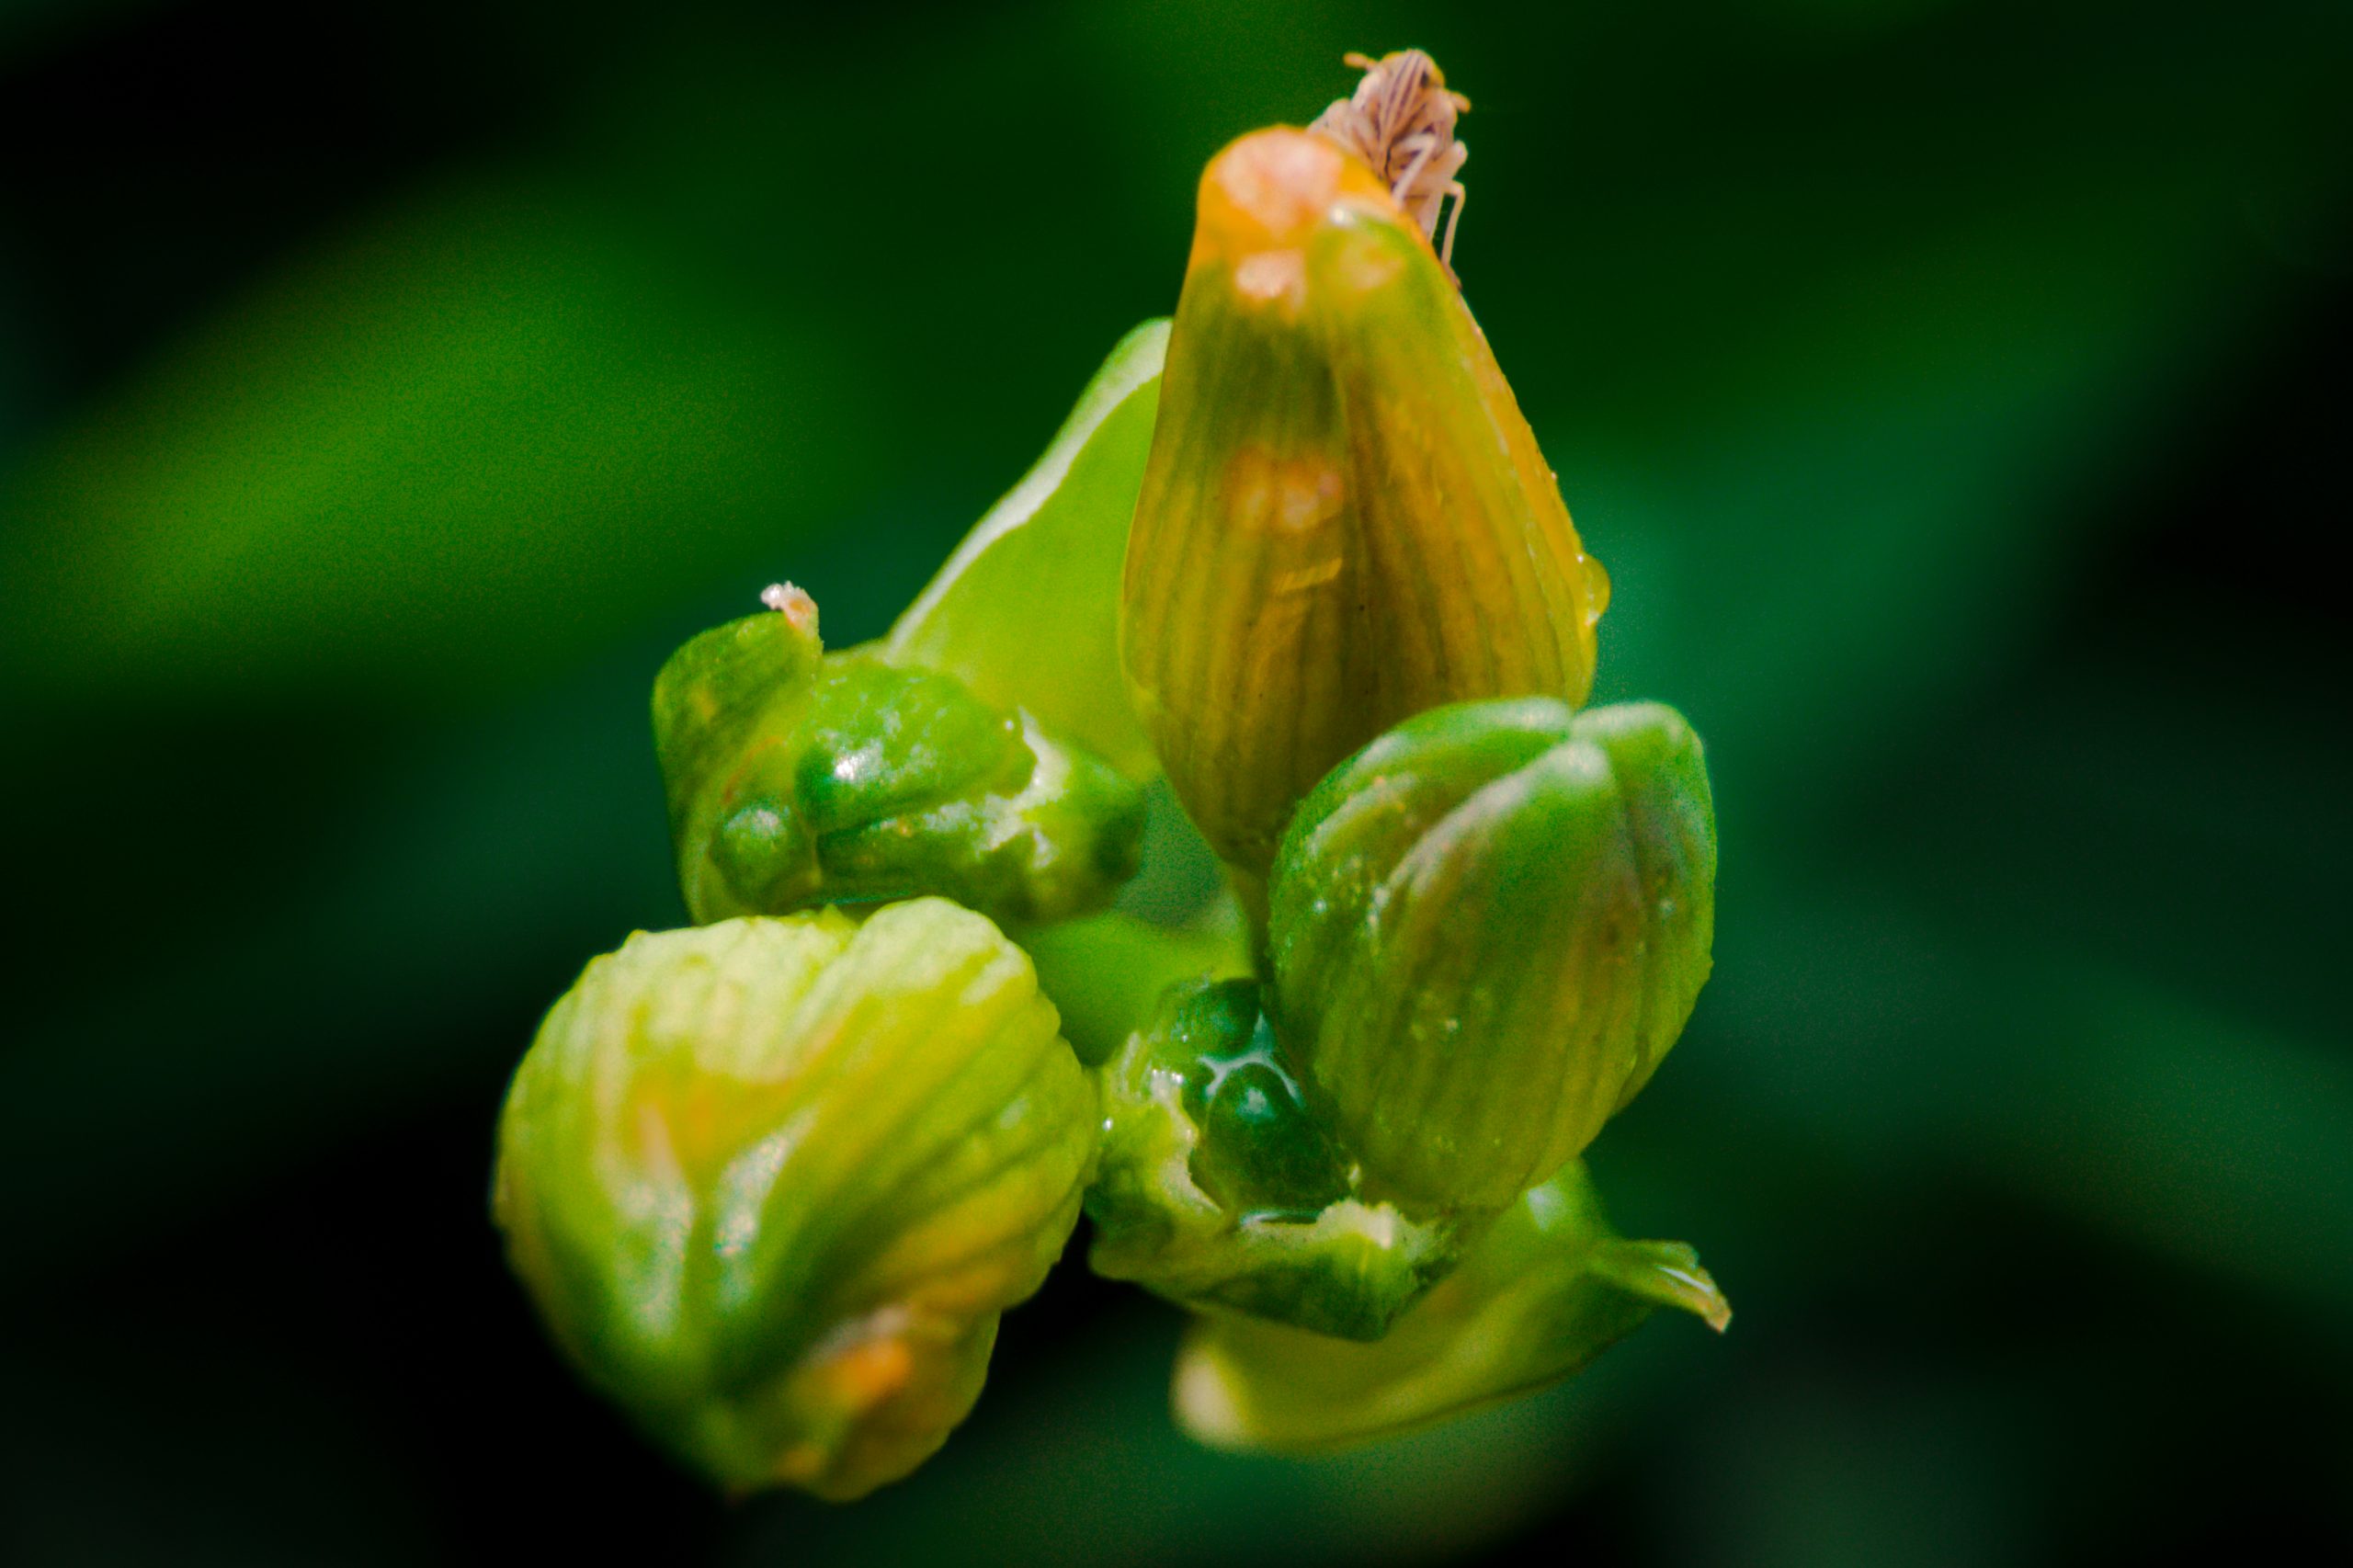 Green buds of flowers